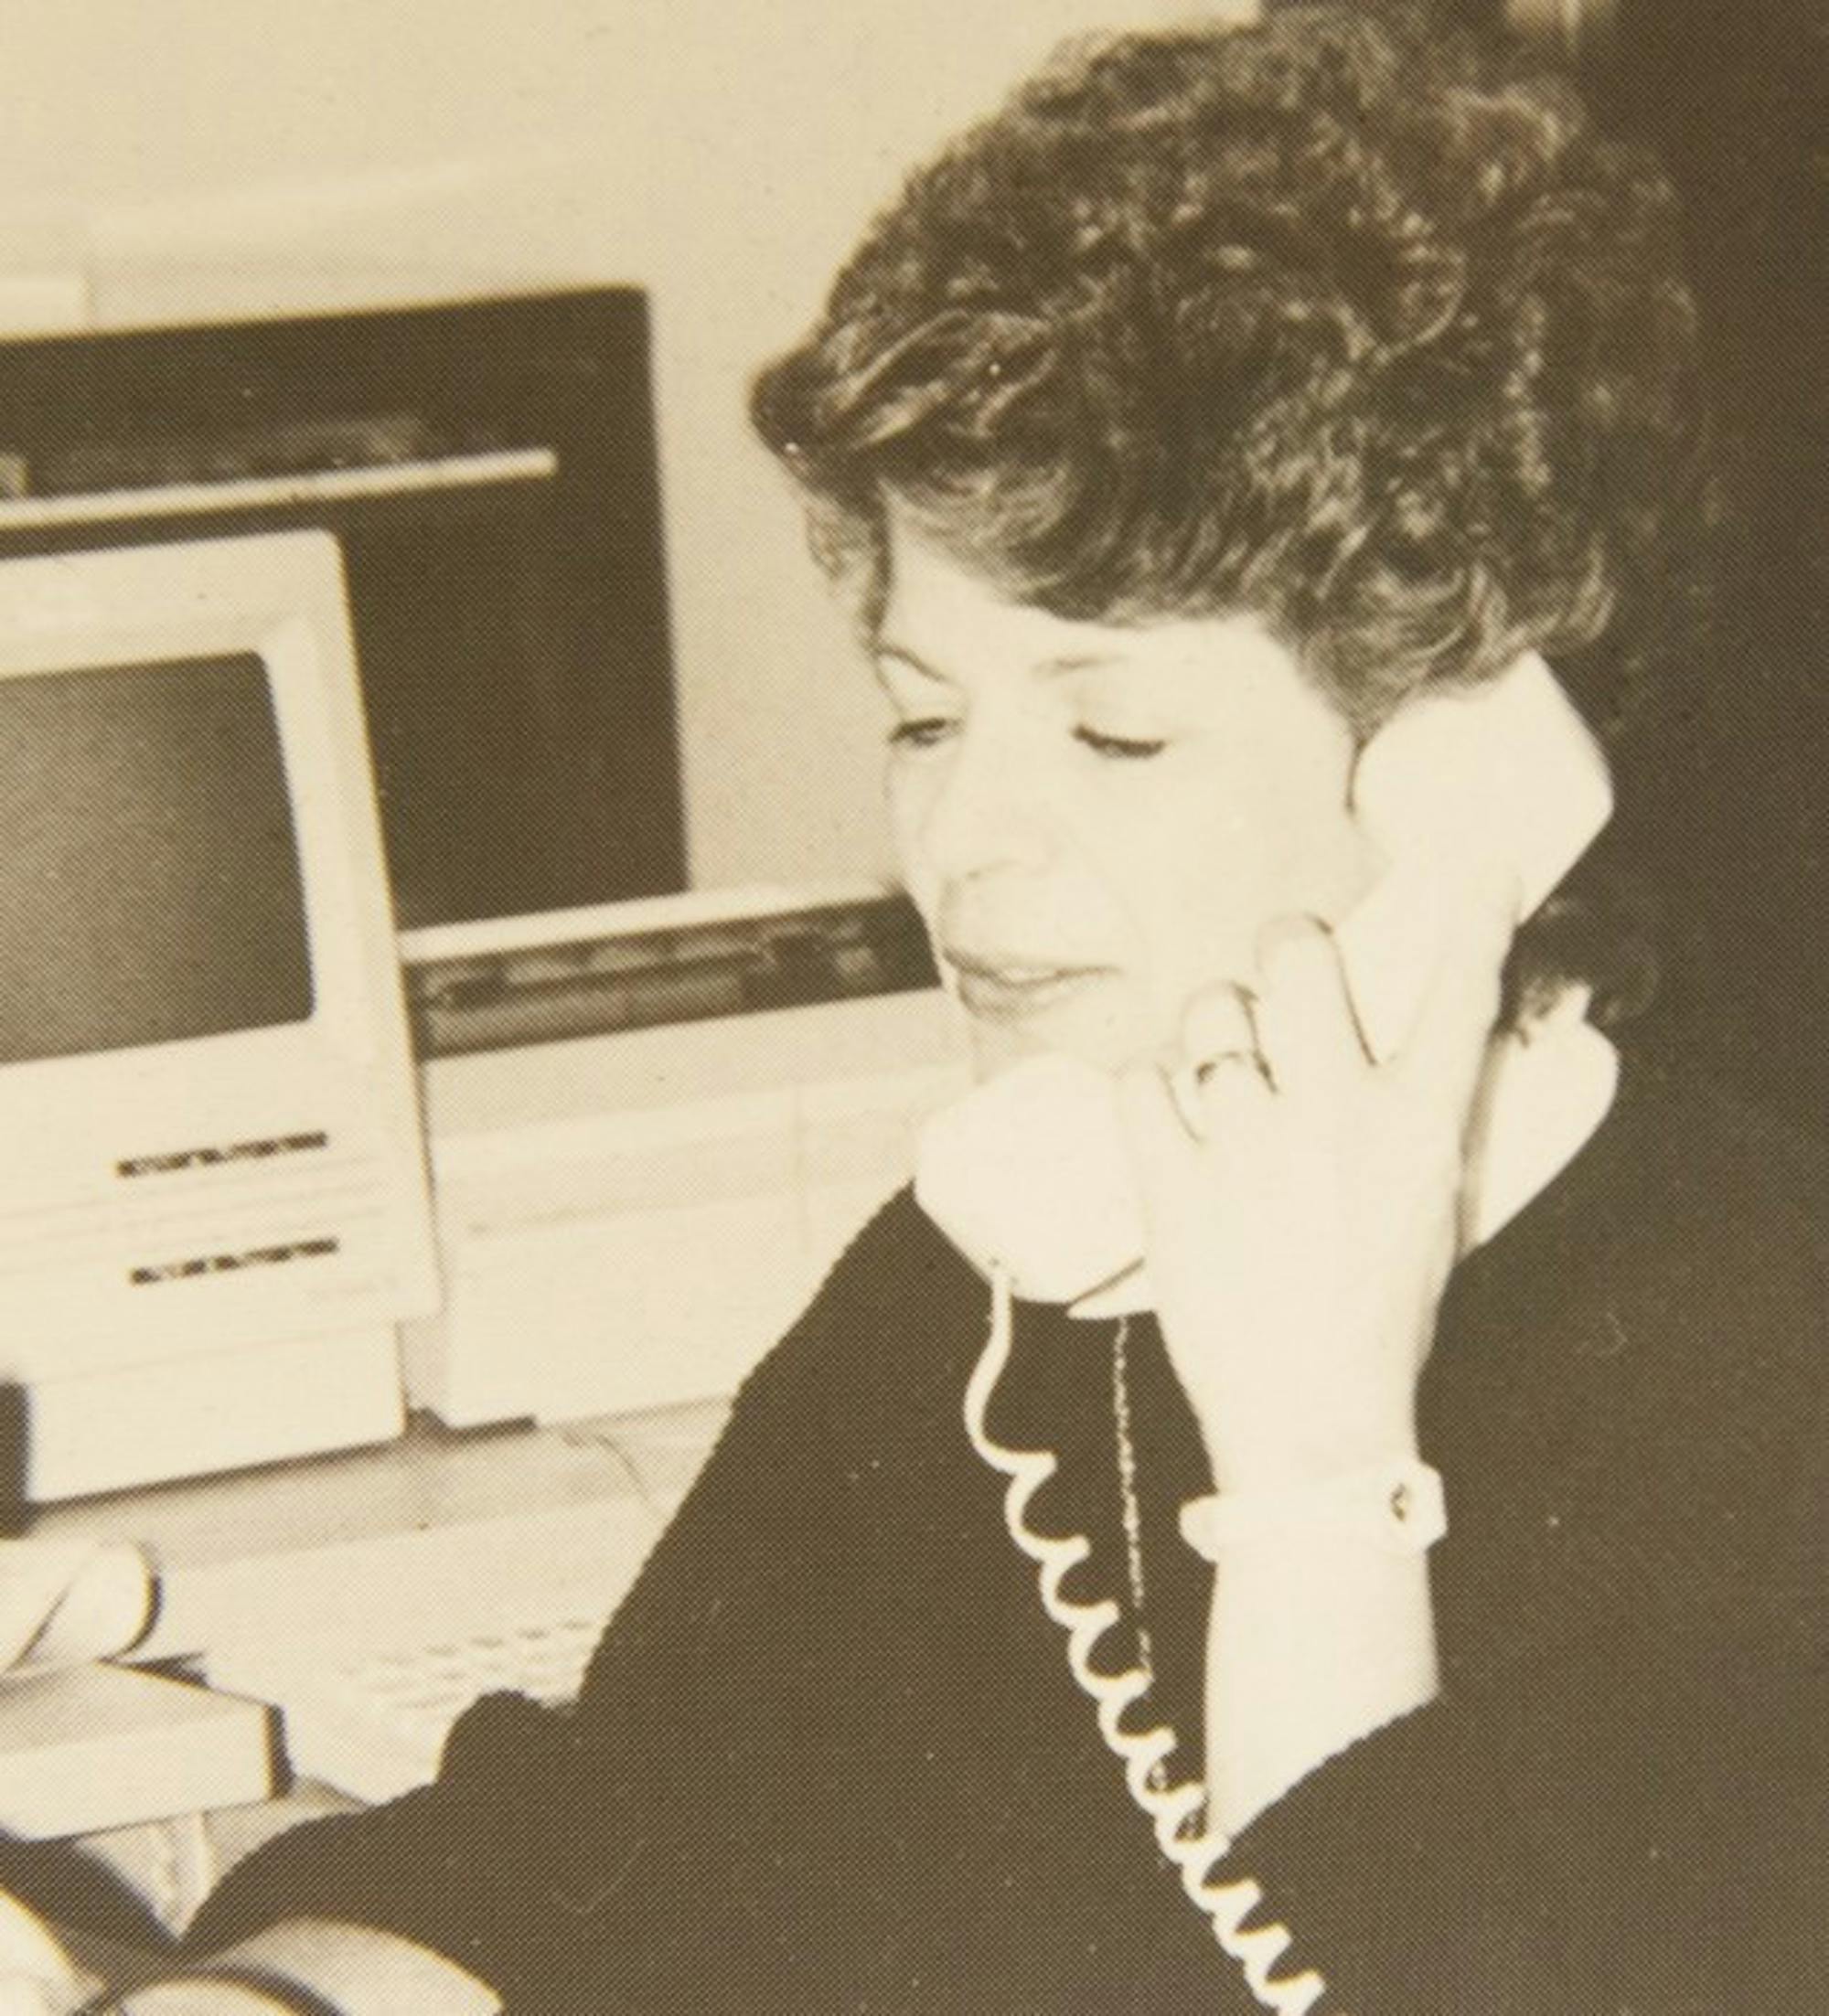 Shirley Grauel answers a phone call in this photo from the Observer's 35th anniversary issue. Grauel worked for the Observer for 30 years.